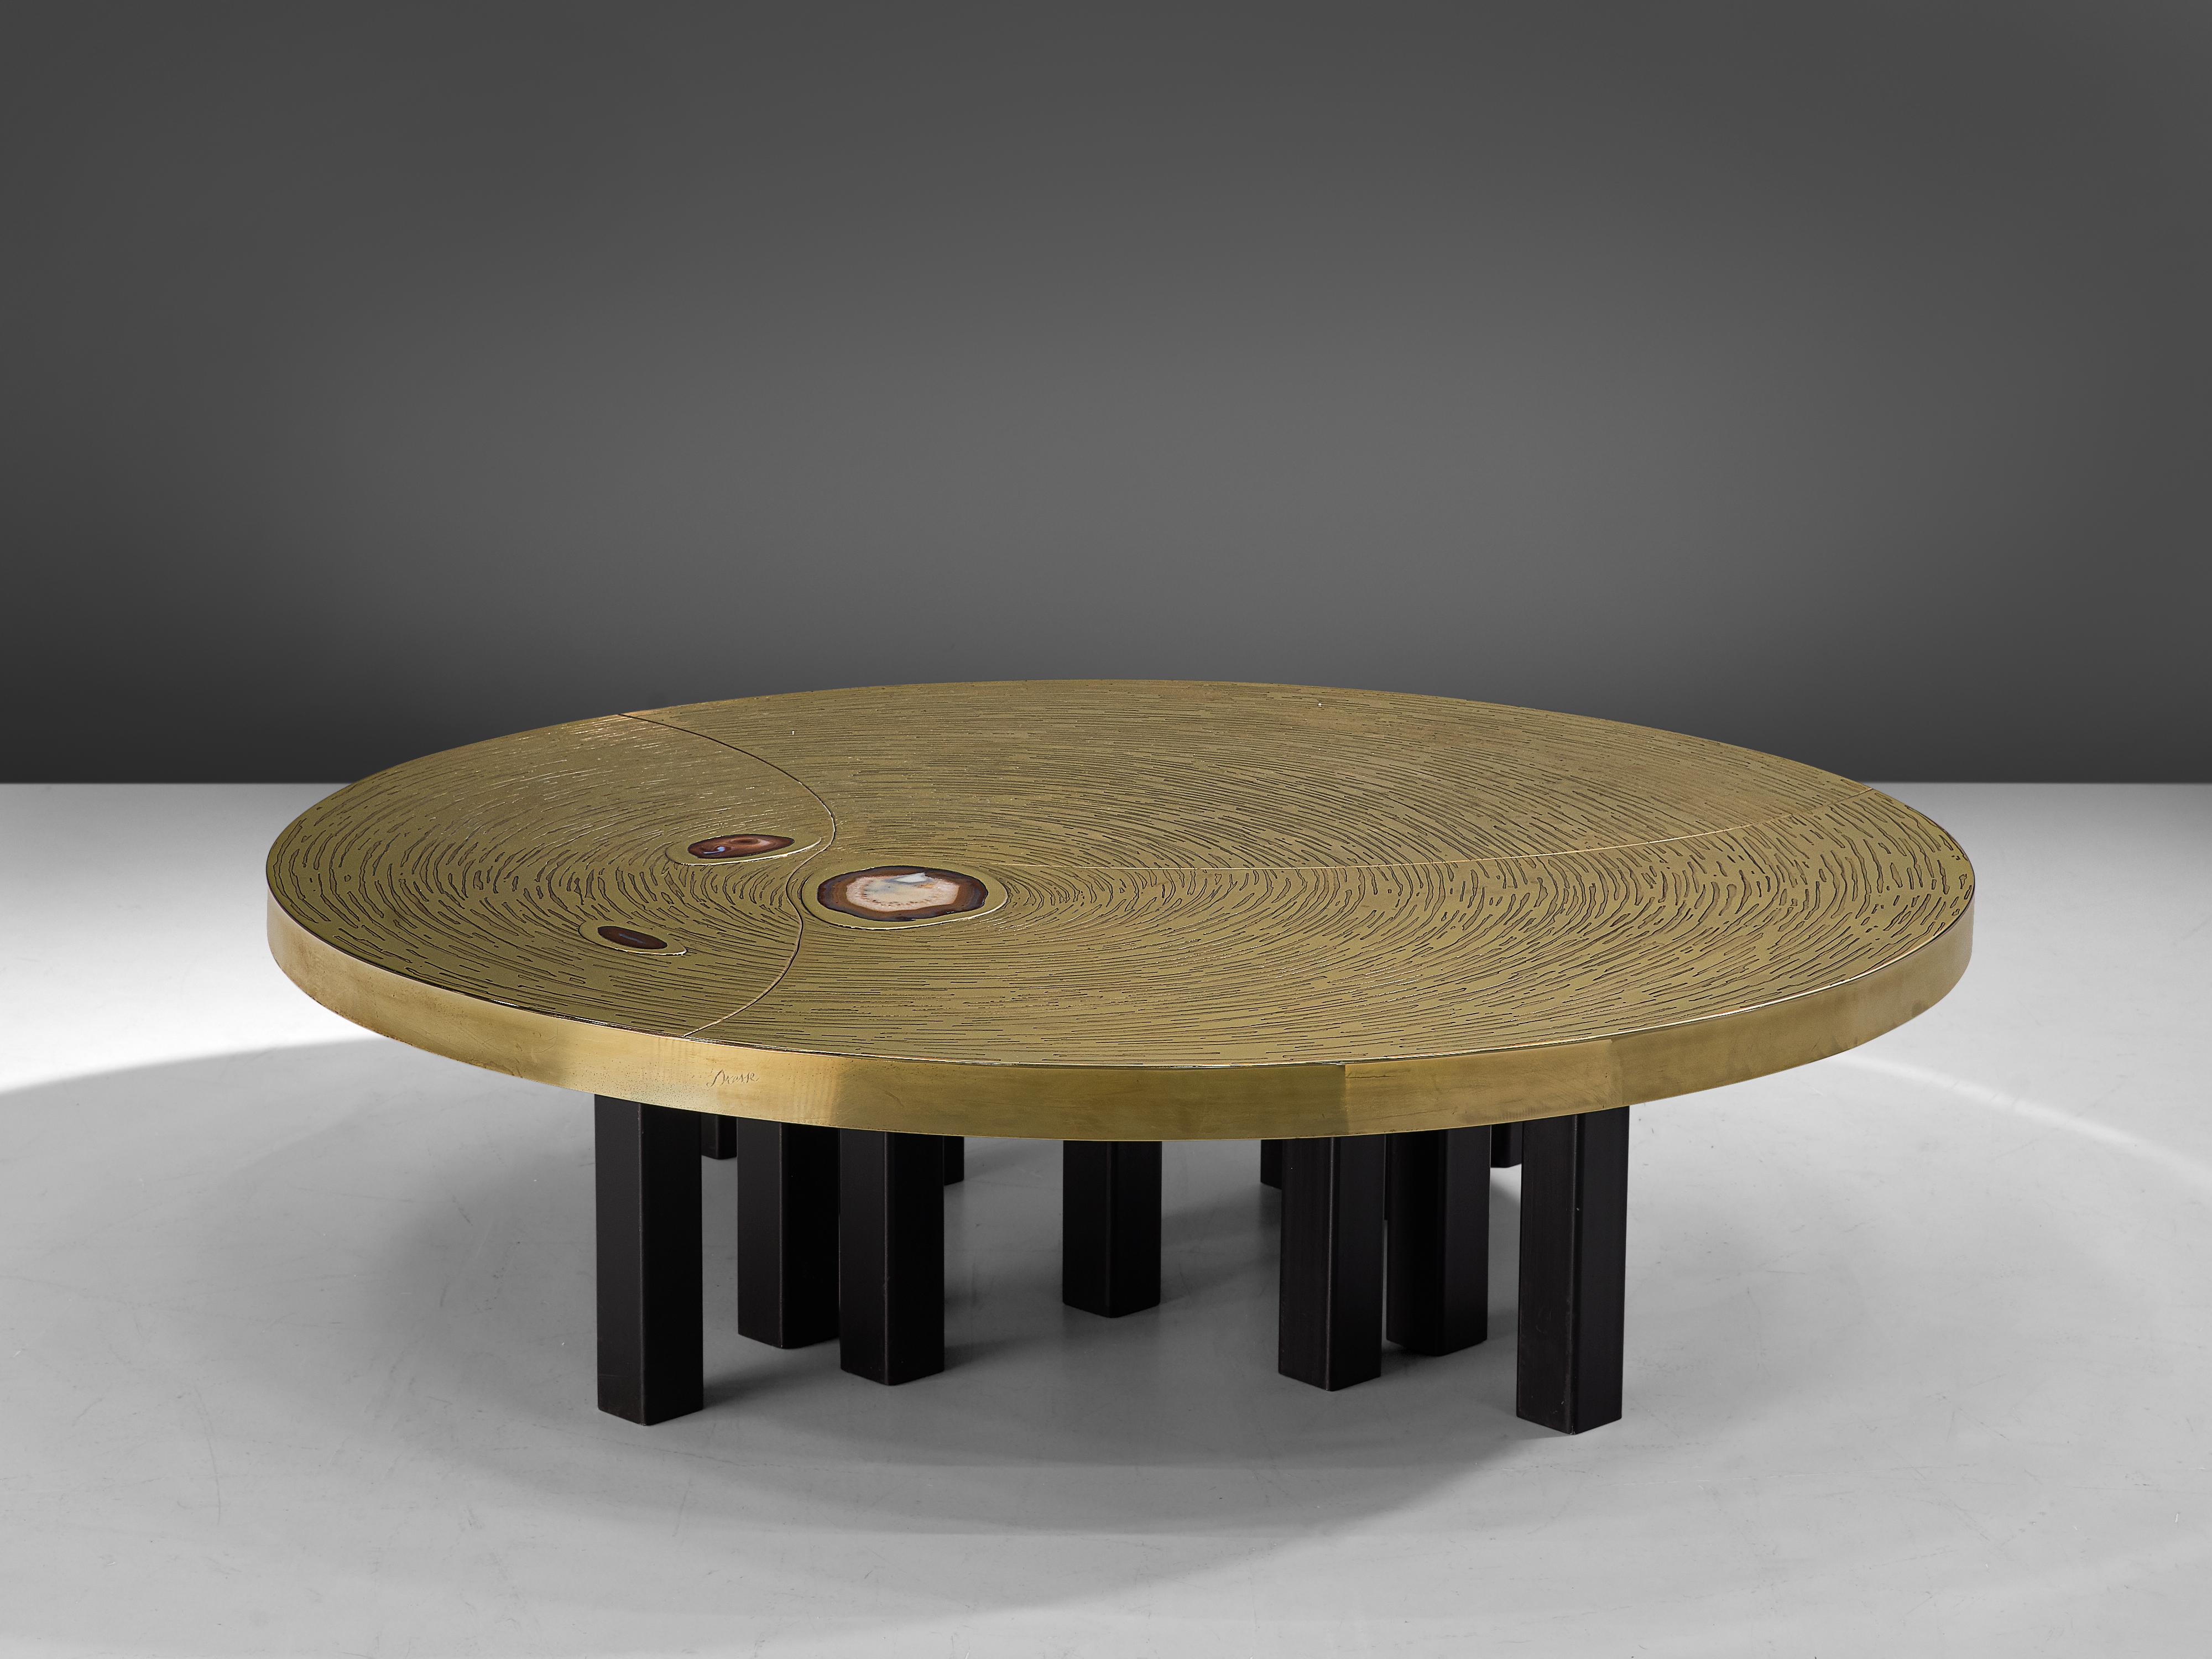 Jean Claude Dresse, coffee table, brass, steel, agate, Belgium, 1970s

A luxurious round cocktail table, crafted with high attention for detail which is characteristic for the work of the Belgian artist Jean Claude Dresse. The table is sculptural